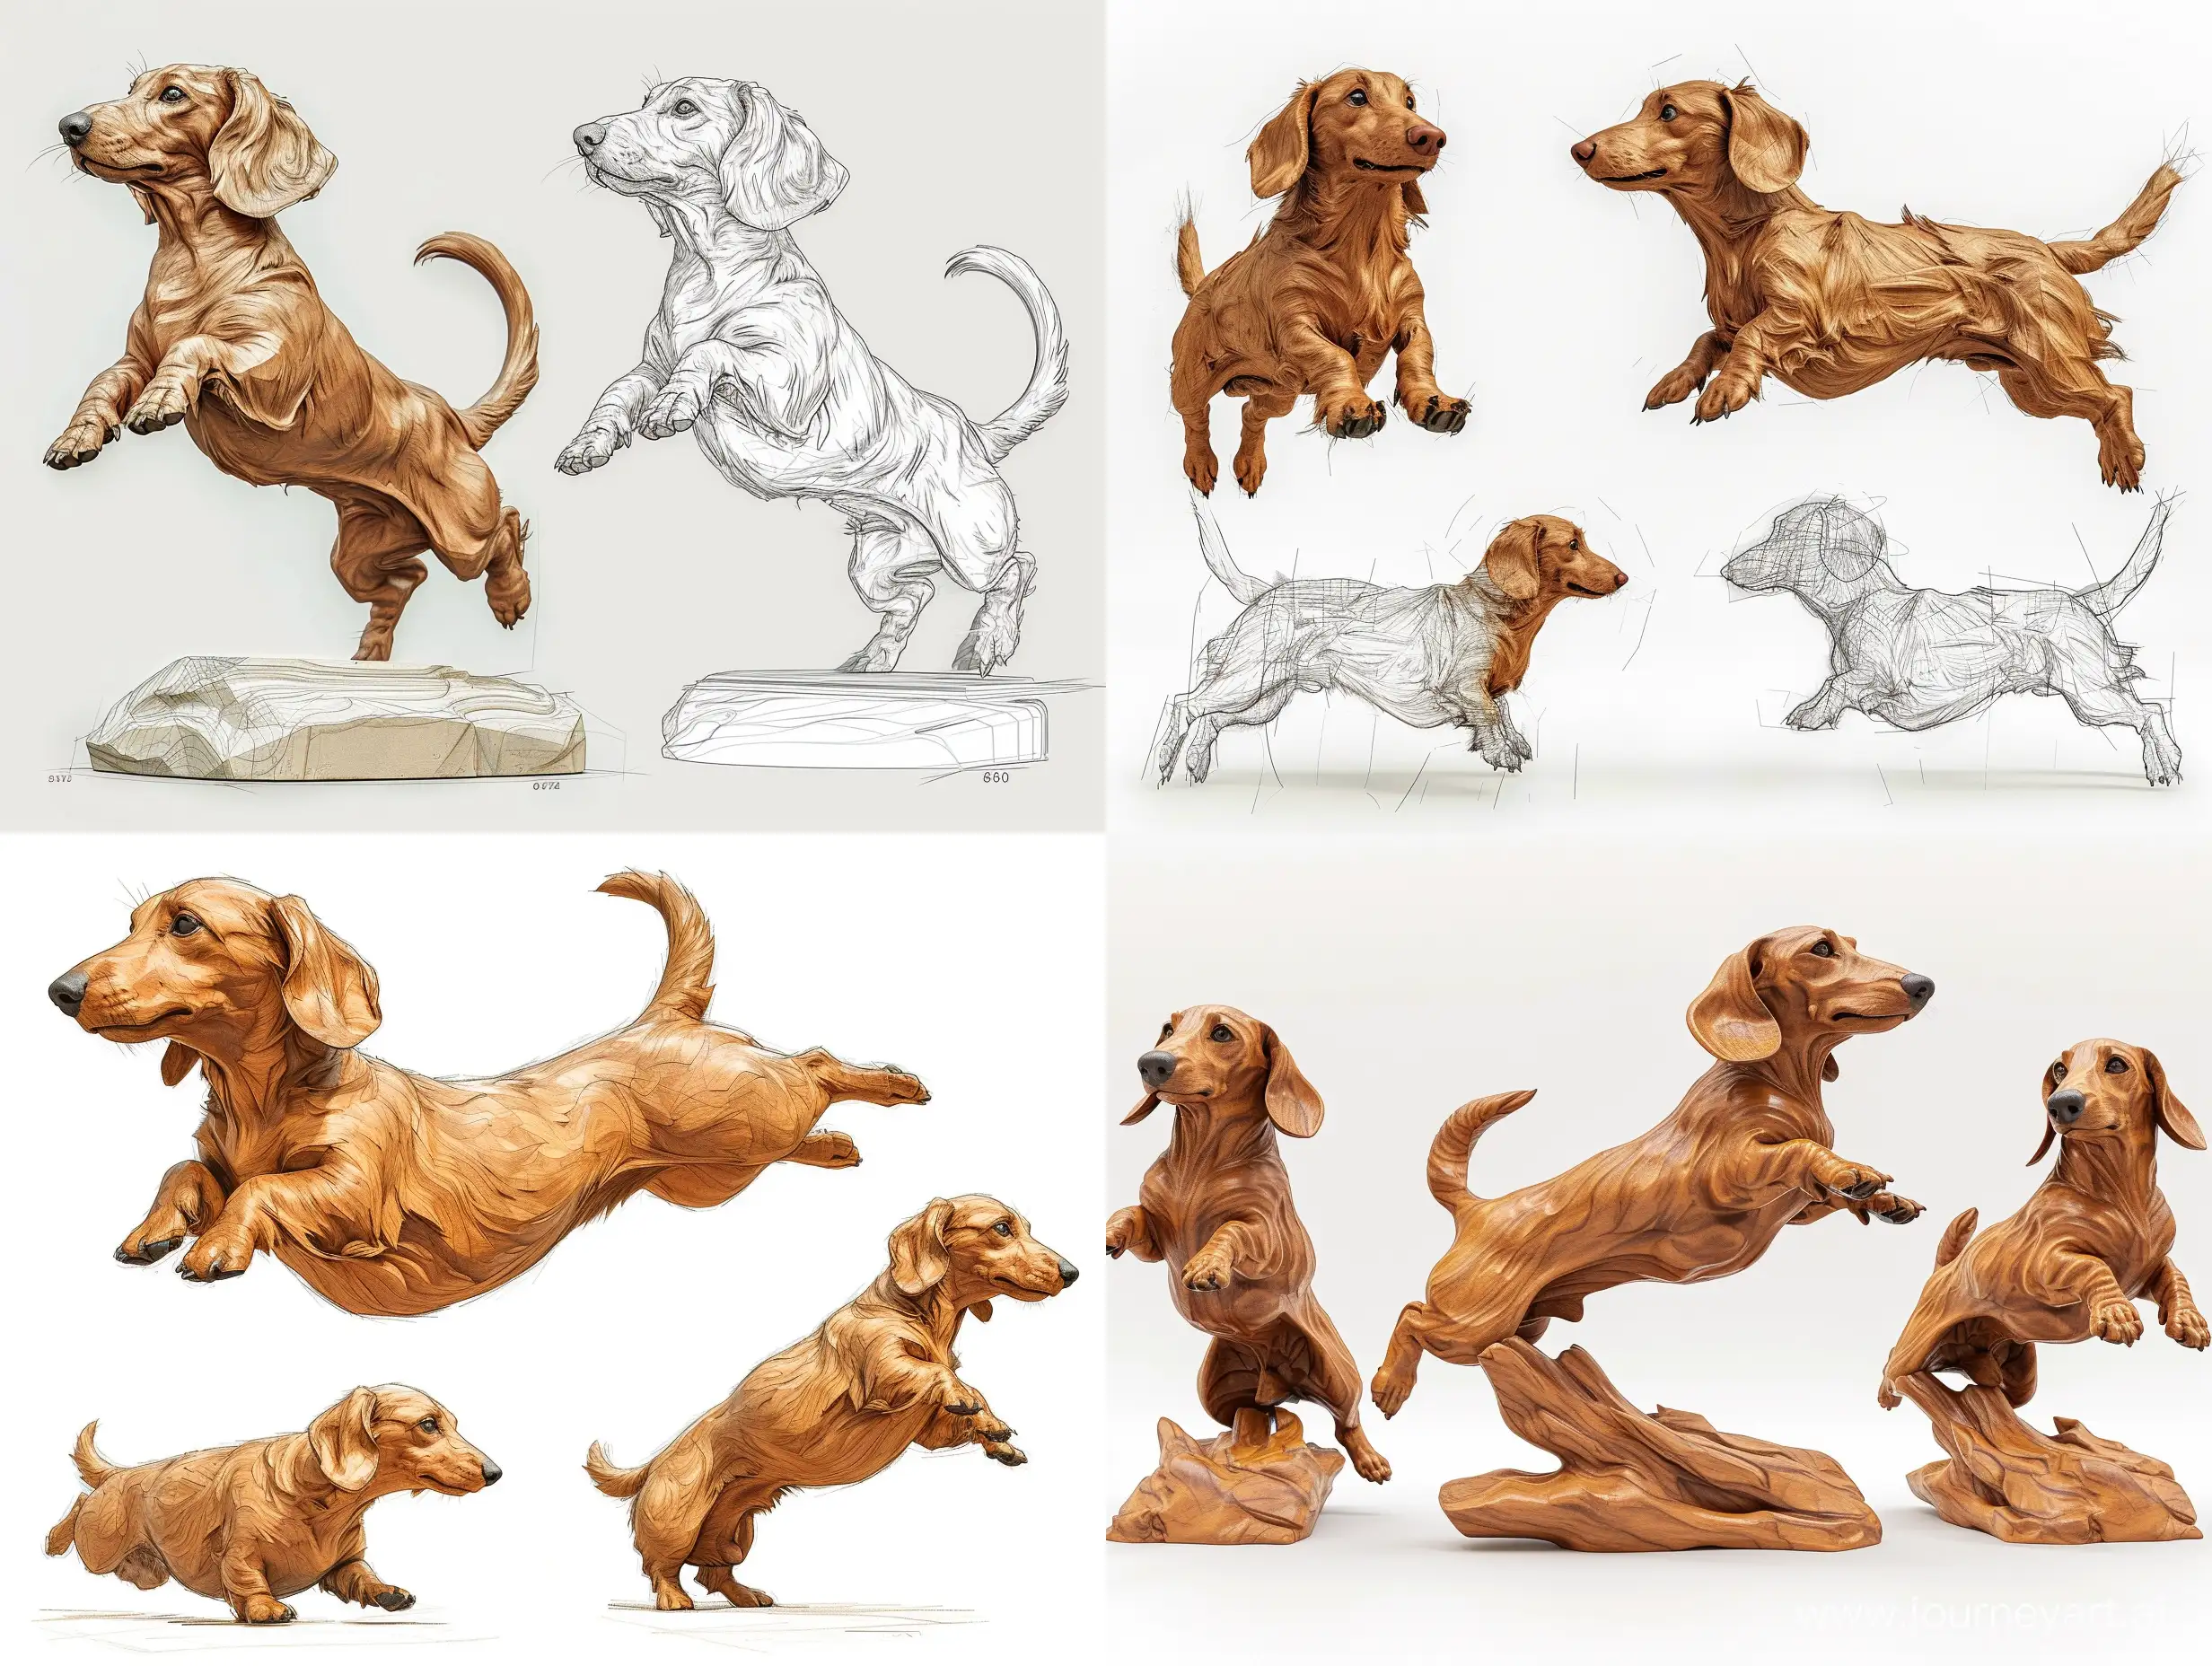 Dynamic-Dachshund-Wooden-Sculpture-Realistic-8k-Render-in-Front-Back-and-Side-Views